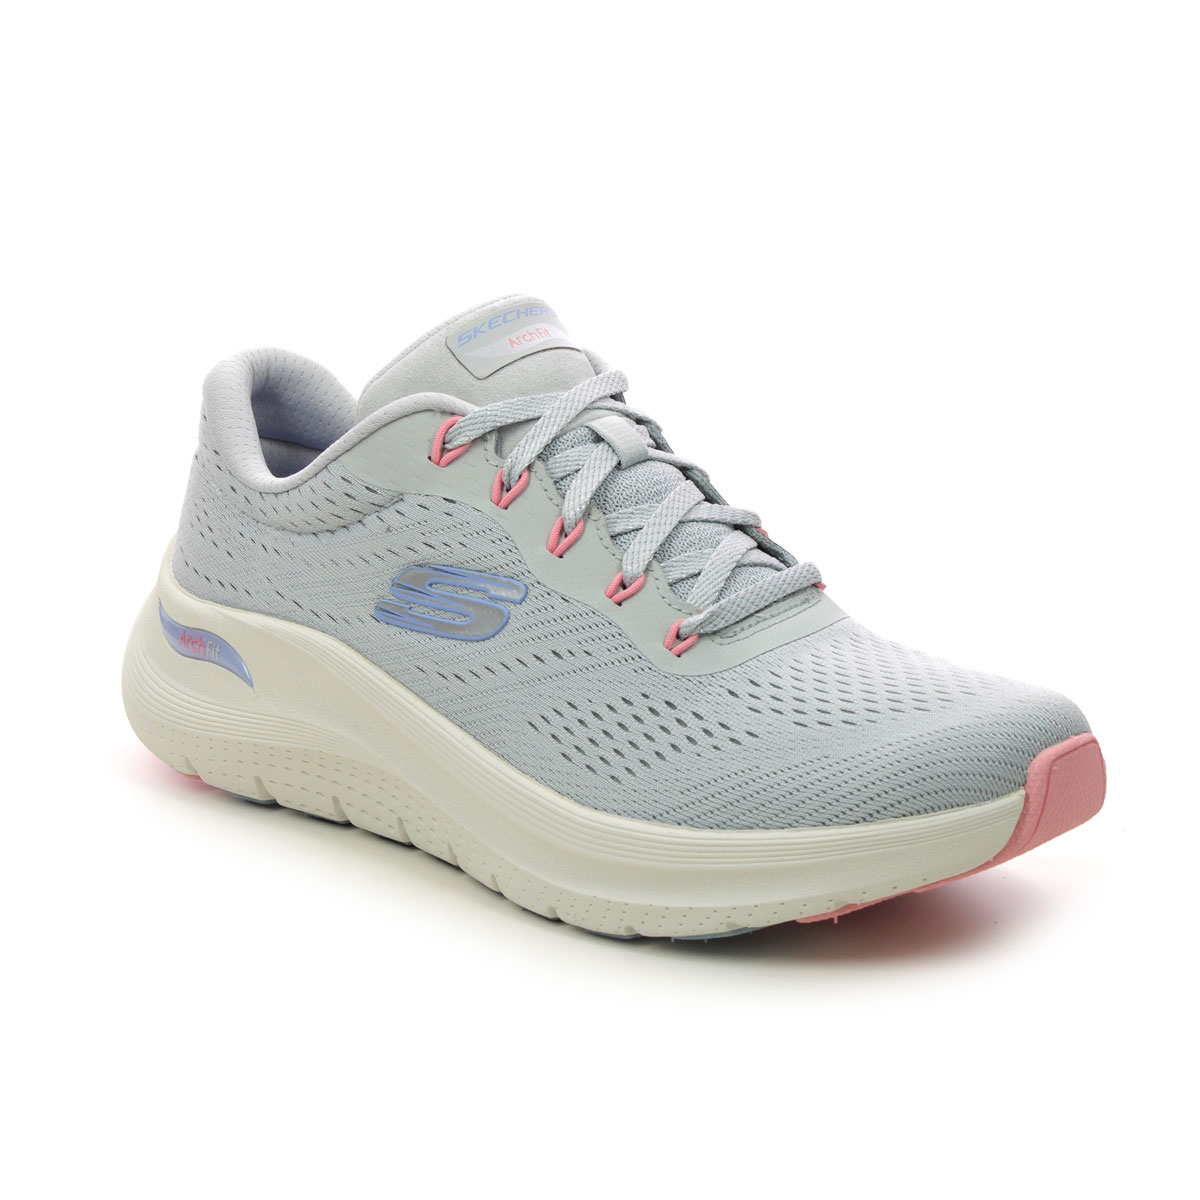 Skechers Arch Fit 2 Lace LGMT Light Grey Multi Womens trainers 150051 in a Plain Textile in Size 8